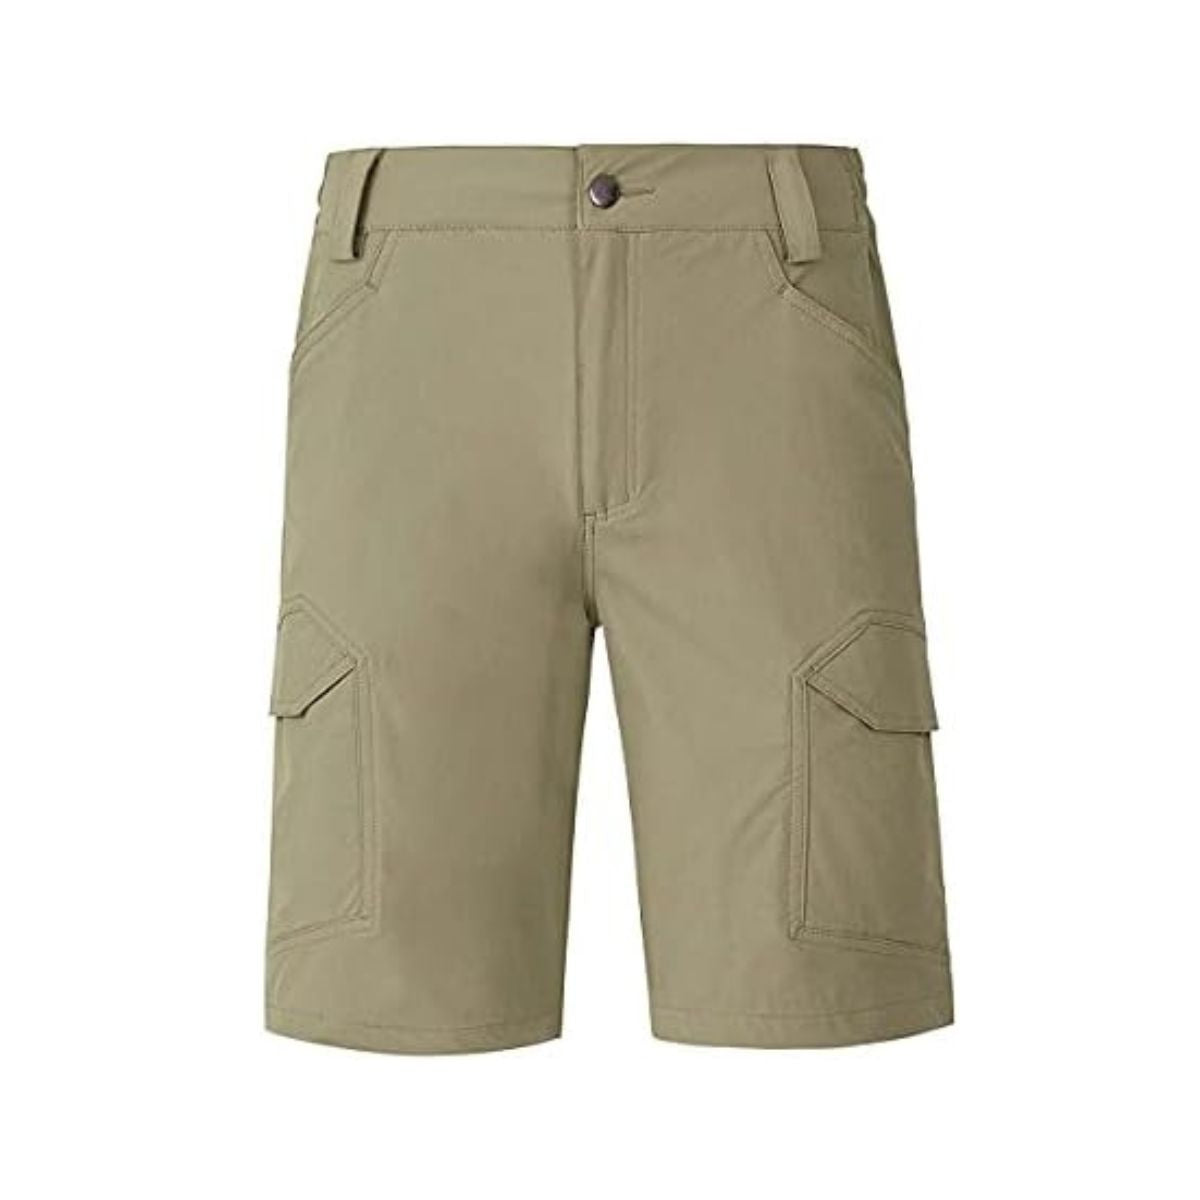 Quick Dry Ripstop Tactical Work Shorts with Pockets